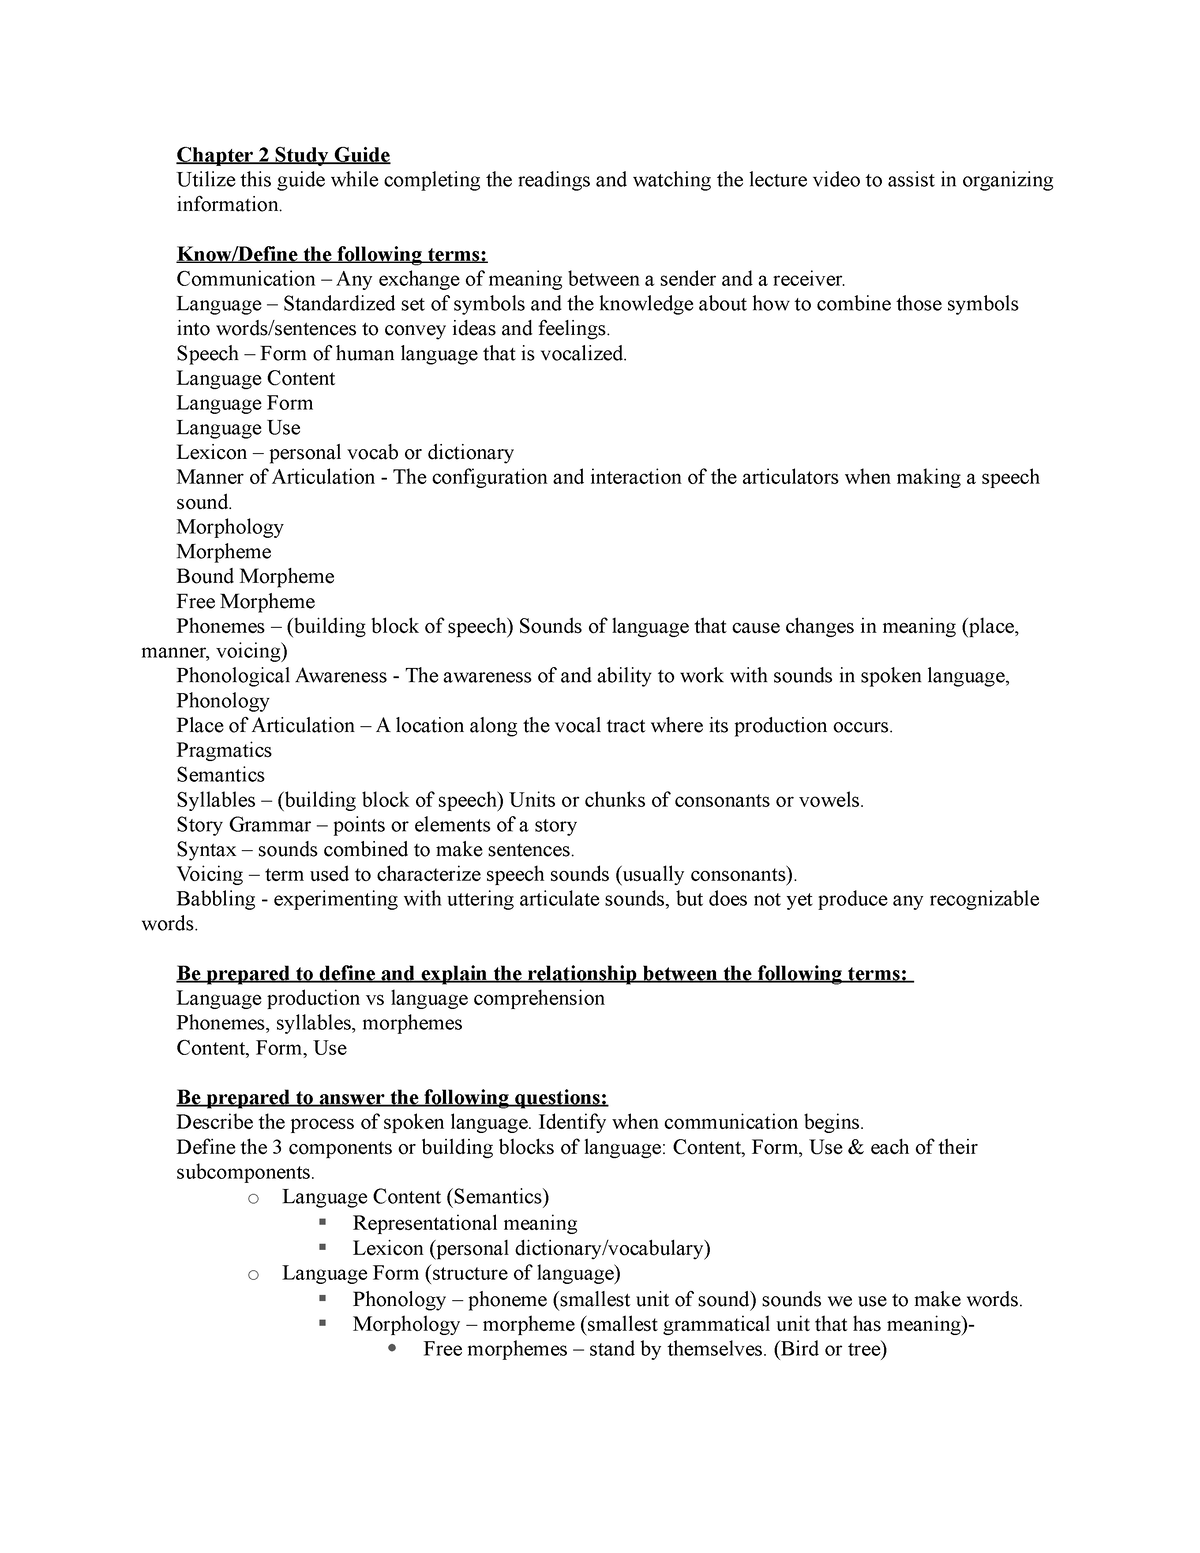 SLP 160 Chapter 2 Study Guide - Chapter 2 Study Guide Utilize this ...